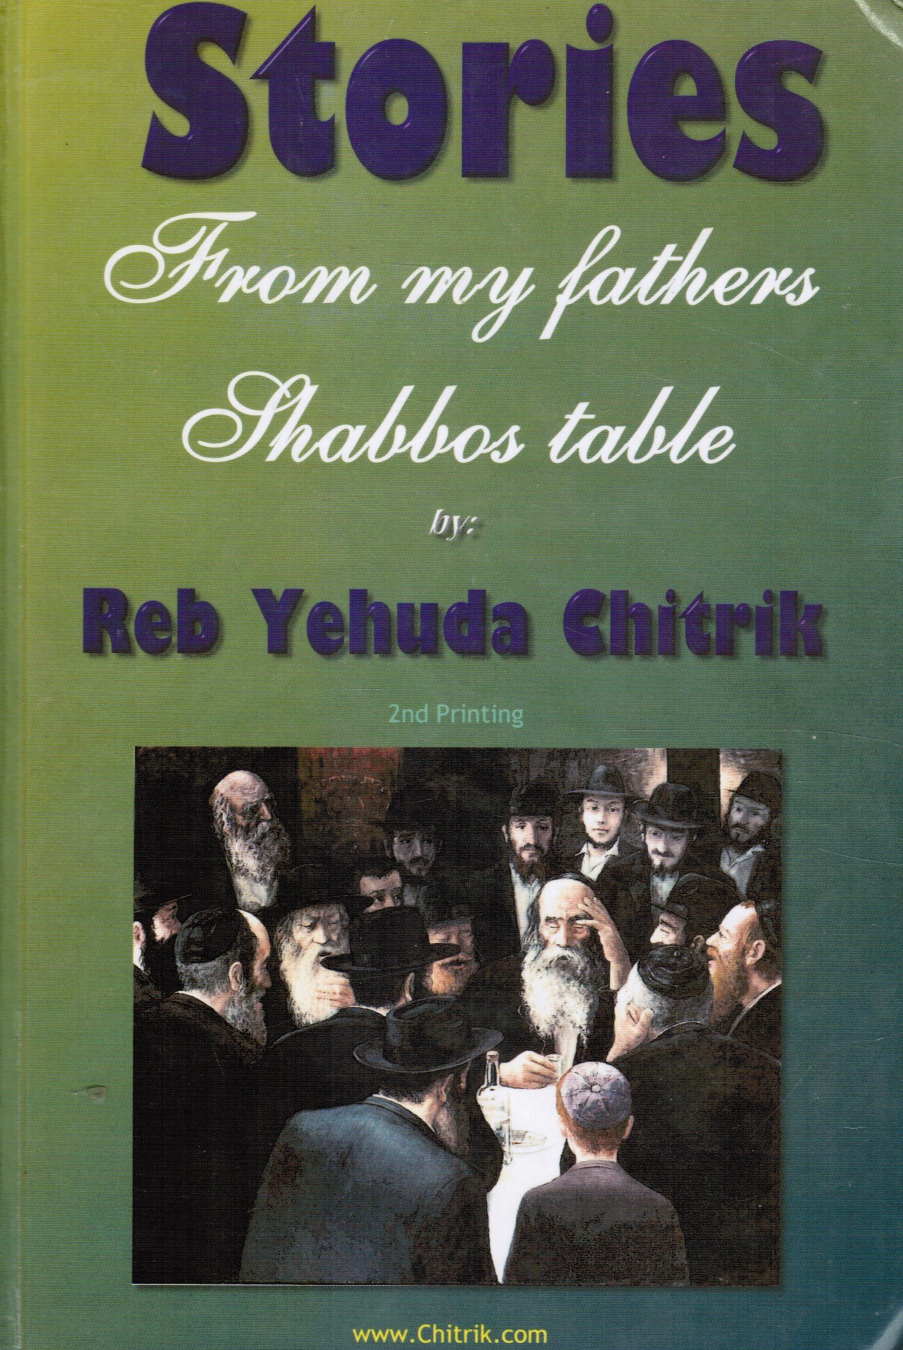 CHITRIK, REB YEHUDA - Stories from My Father`S Shabbos Table - a Collection of Chabad Chasidic Stories